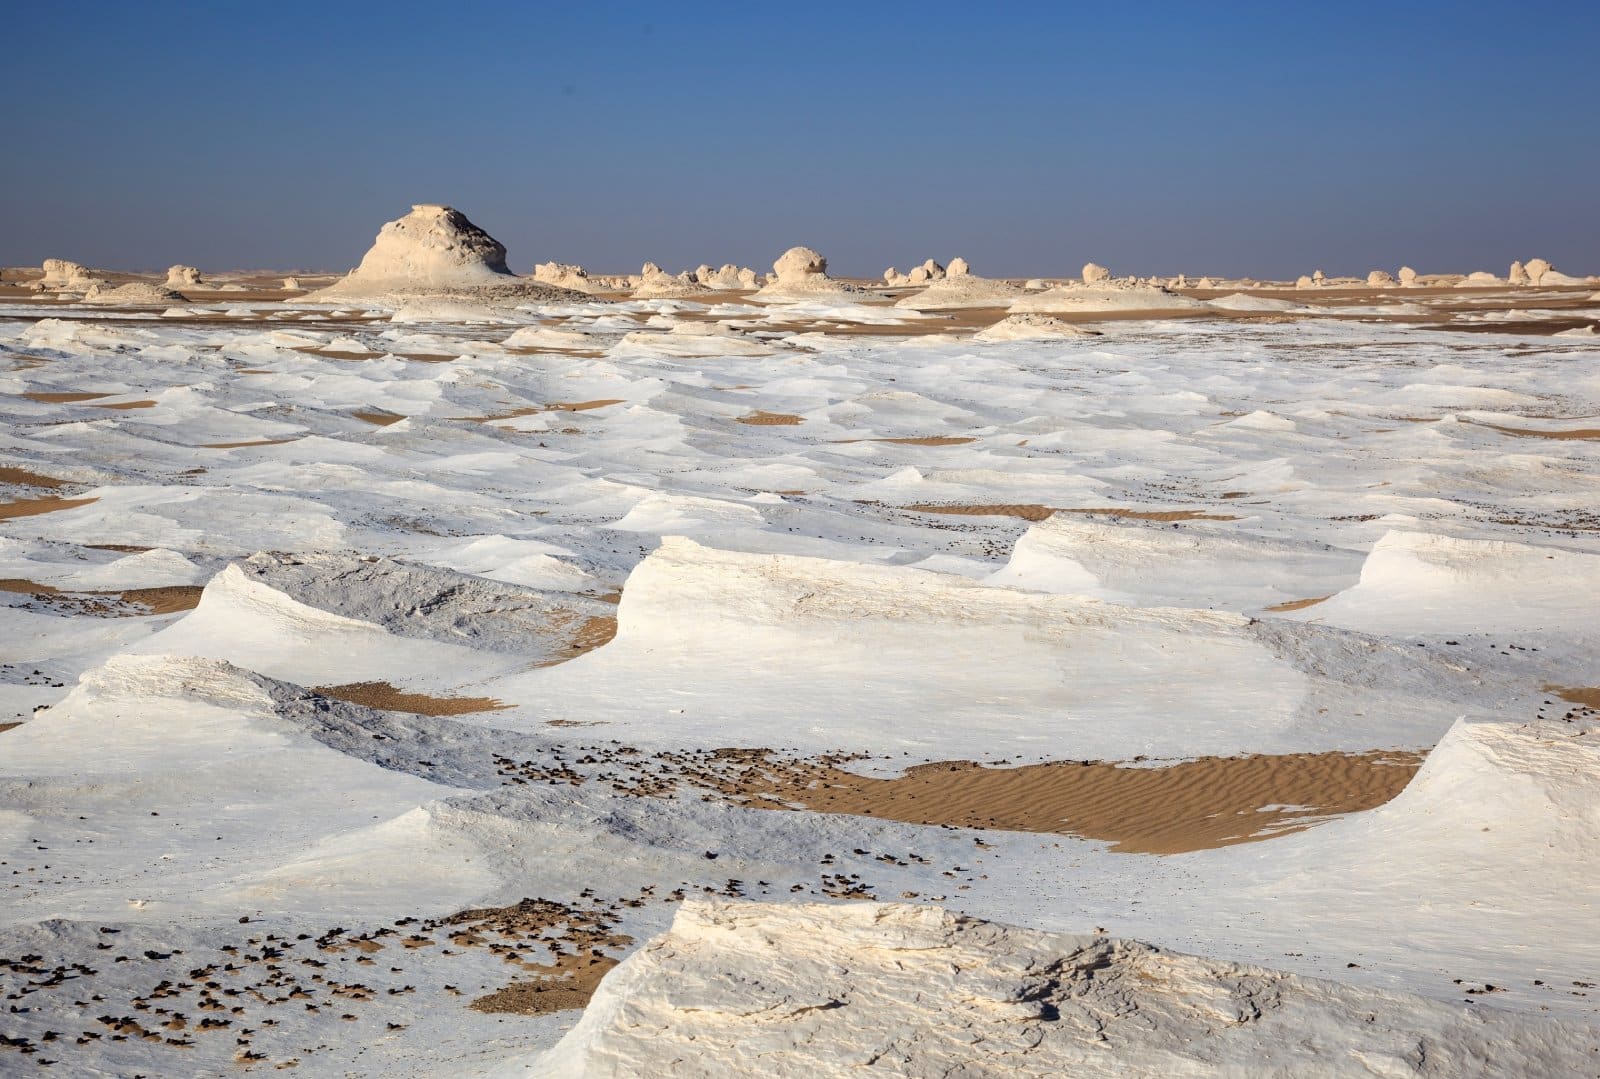 <p class="wp-caption-text">Image Credit: Shutterstock / kataleewan intarachote</p>  <p><span>The White Desert National Park, located roughly midway between Farafra and Bahariya Oasis, is an otherworldly landscape that captivates the imagination. Known for its surreal chalk rock formations sculpted by centuries of sandstorms, the park resembles a snow-covered landscape under the bright desert sun. These natural sculptures come in various shapes, some resembling giant mushrooms or pebbles, creating a dreamlike atmosphere that feels more akin to a science fiction scene than a desert on Earth. The White Desert is part of Egypt’s larger Western Desert, starkly contrasting the fertile Nile Valley and the bustling cities. A visit here, especially during sunrise or sunset when the rocks glow with orange and pink hues, provides a profound sense of solitude and wonder. For those adventurous enough to stay overnight, camping under the stars reveals a sky of unparalleled clarity, untouched by light pollution, showcasing the Milky Way in all its glory.</span></p>